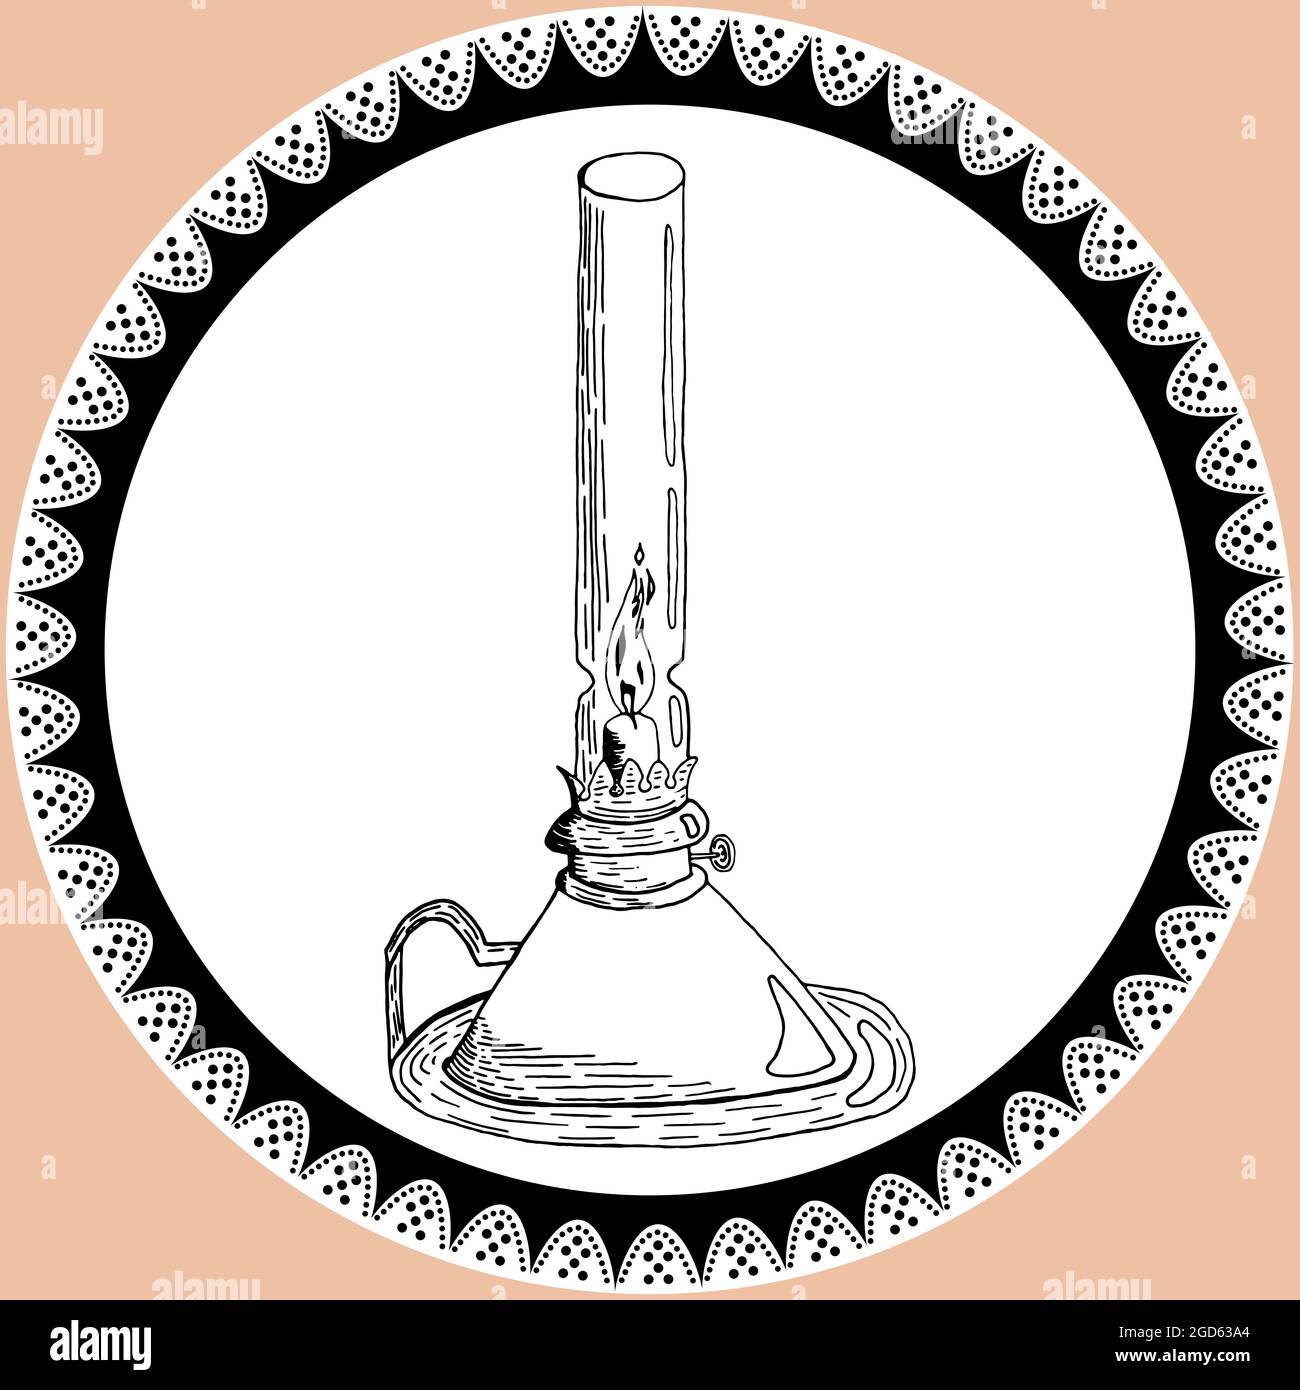 Doodle lantern, kerosene lamp in vintage style with lace. Silhouette of lamp hand drawn by pencil in black and white colors Stock Vector